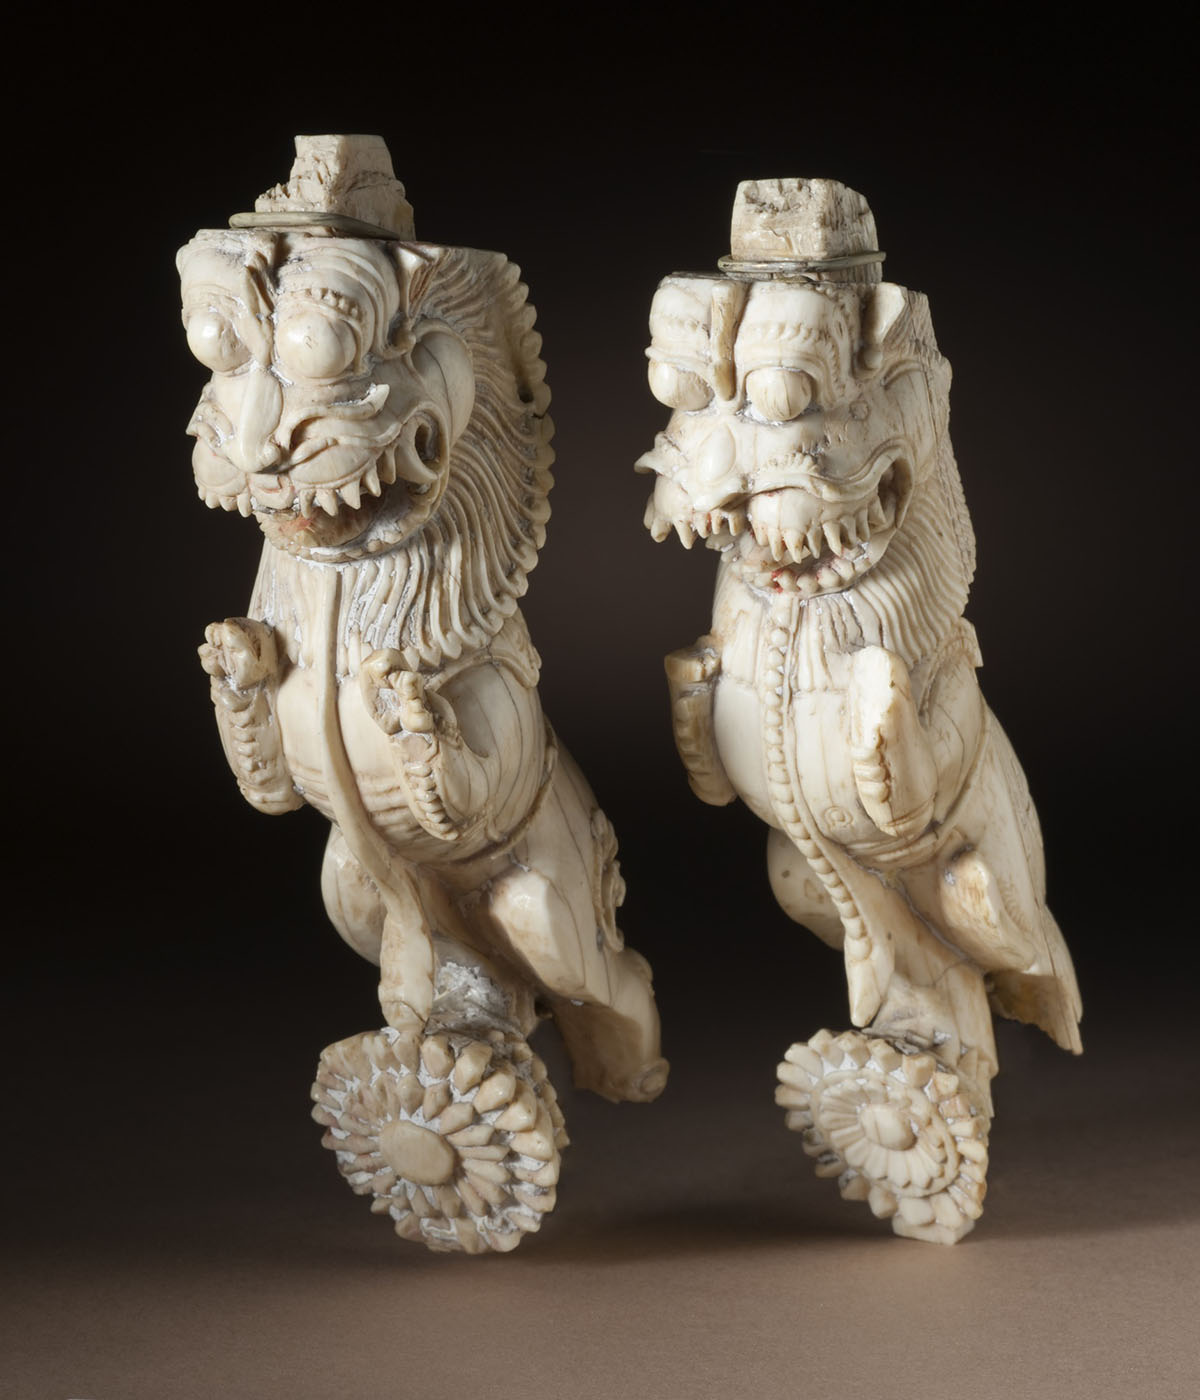 A pair of architectural brackets depicting the mythical creature yali who is part lion, elephant and horse.